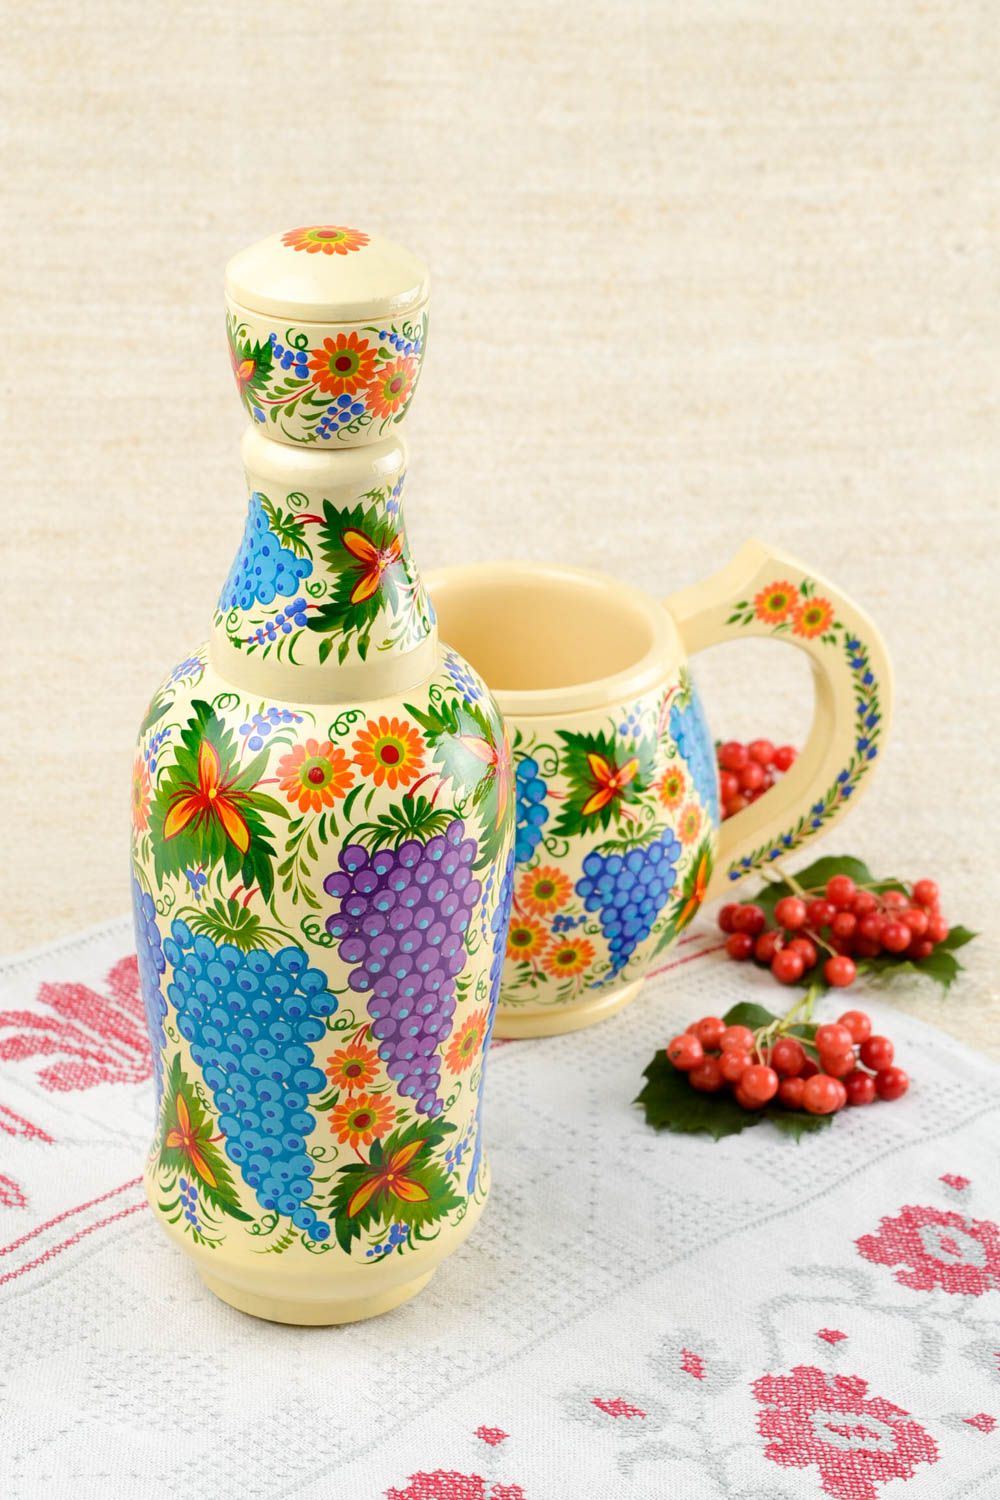 Handmade wooden bottle wooden cup kitchen design gift ideas decorative use only photo 1